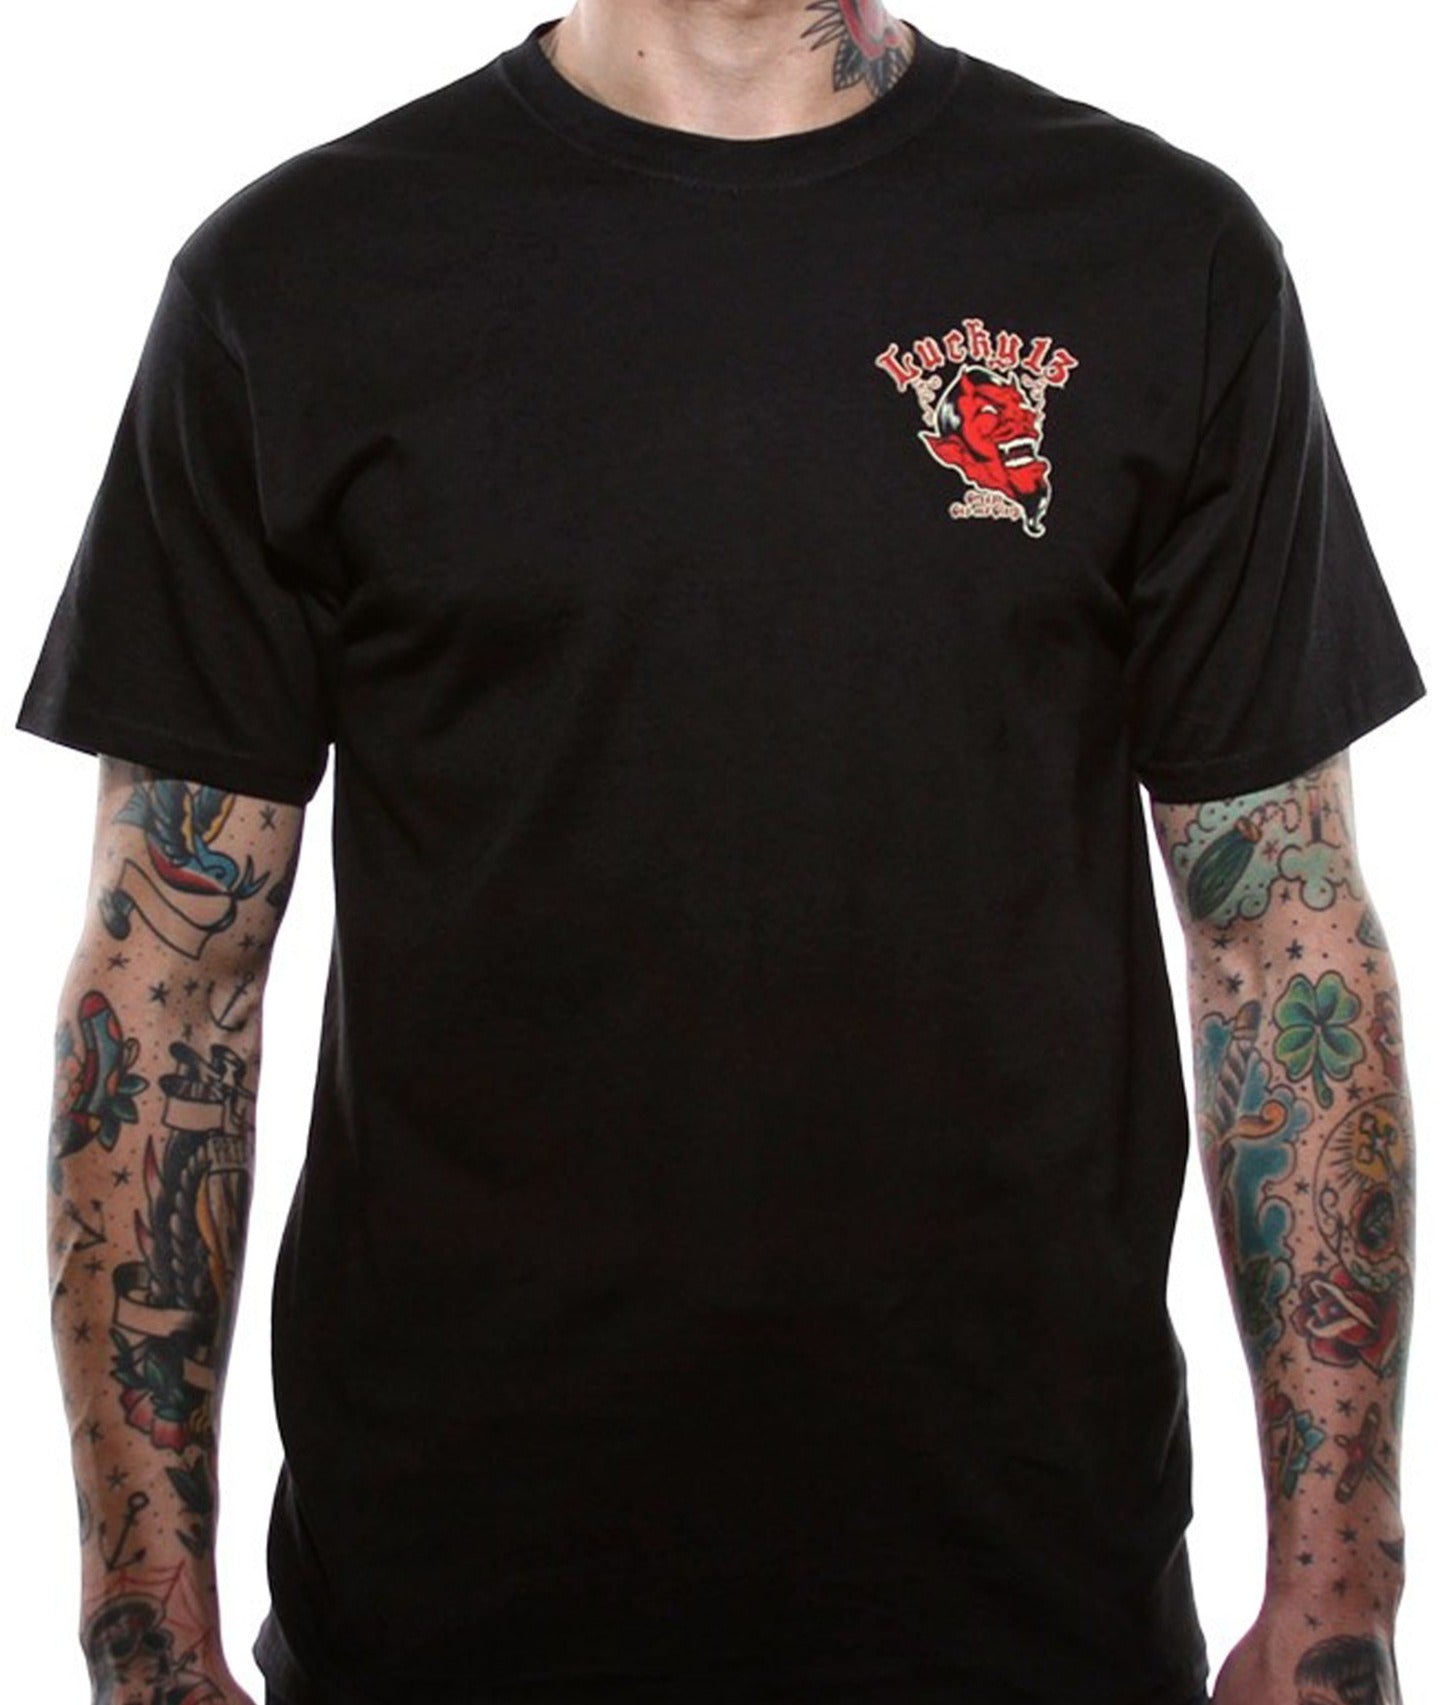 Grease Gas & Glory Mens Short Sleeve Tee Shirt By Lucky 13 Black ...